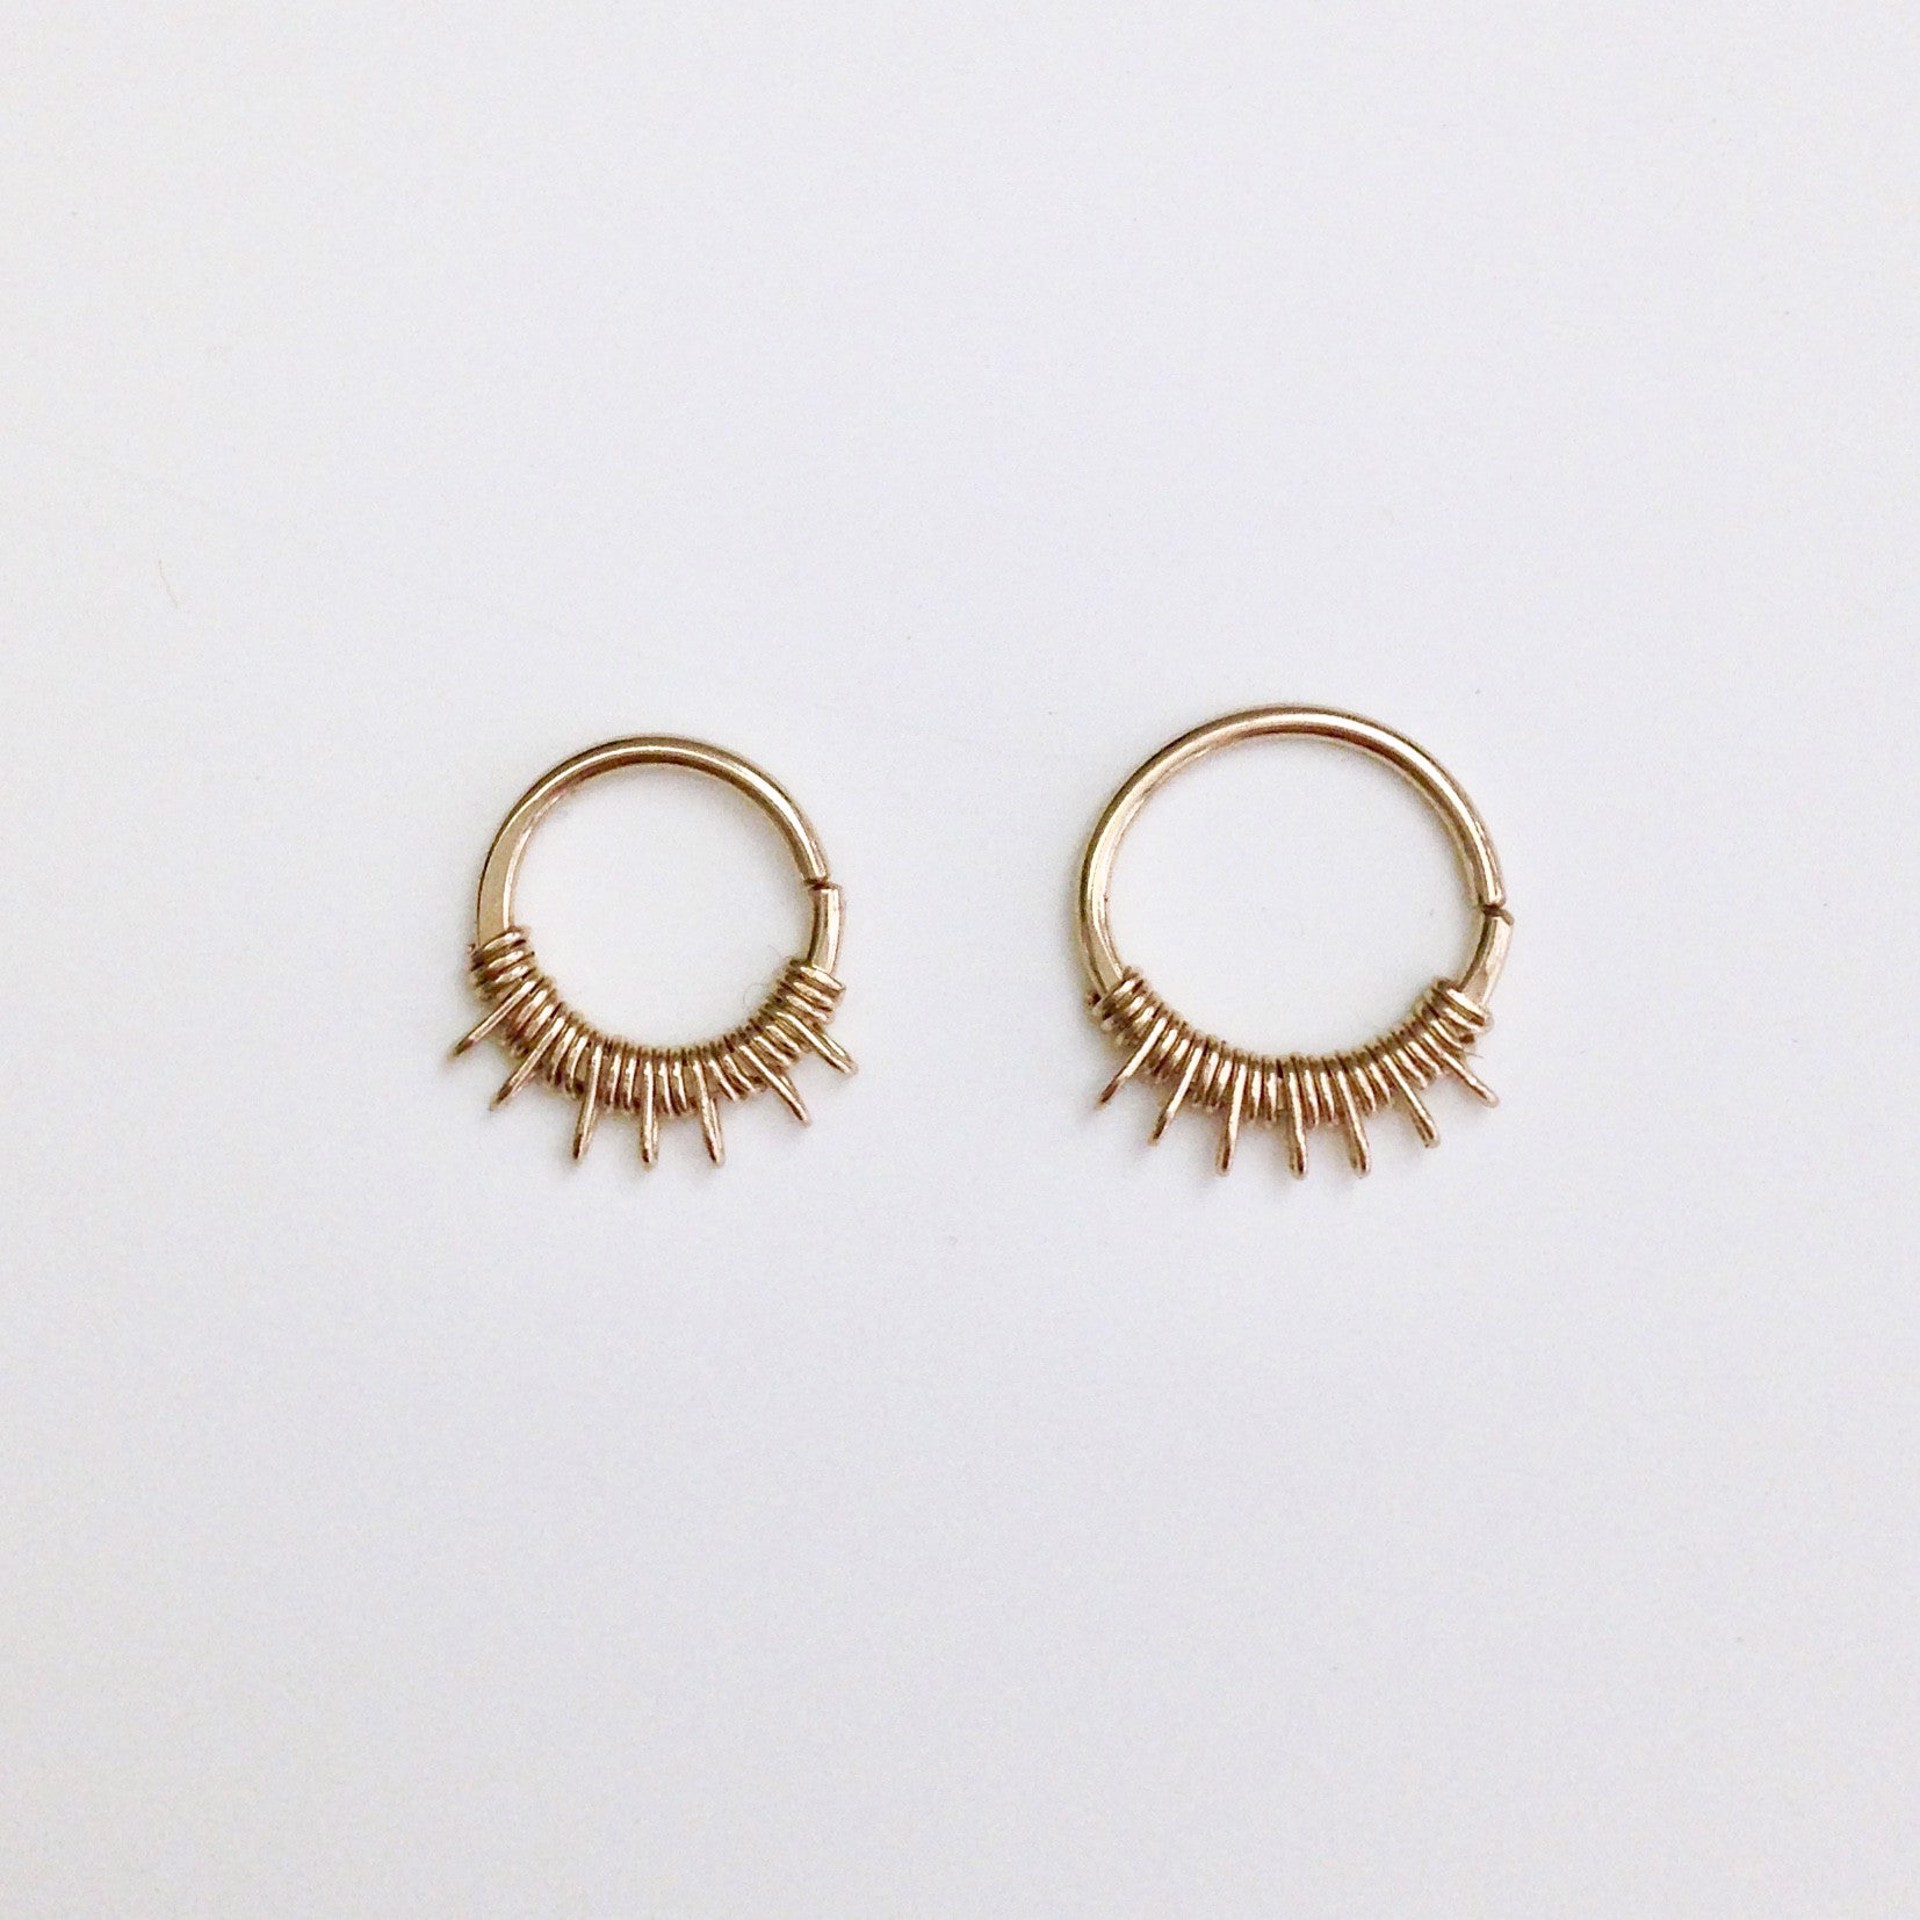 Lalita Septum Ring- Gold Filled - 6mm / 18 by Clementine & Co. Jewelry